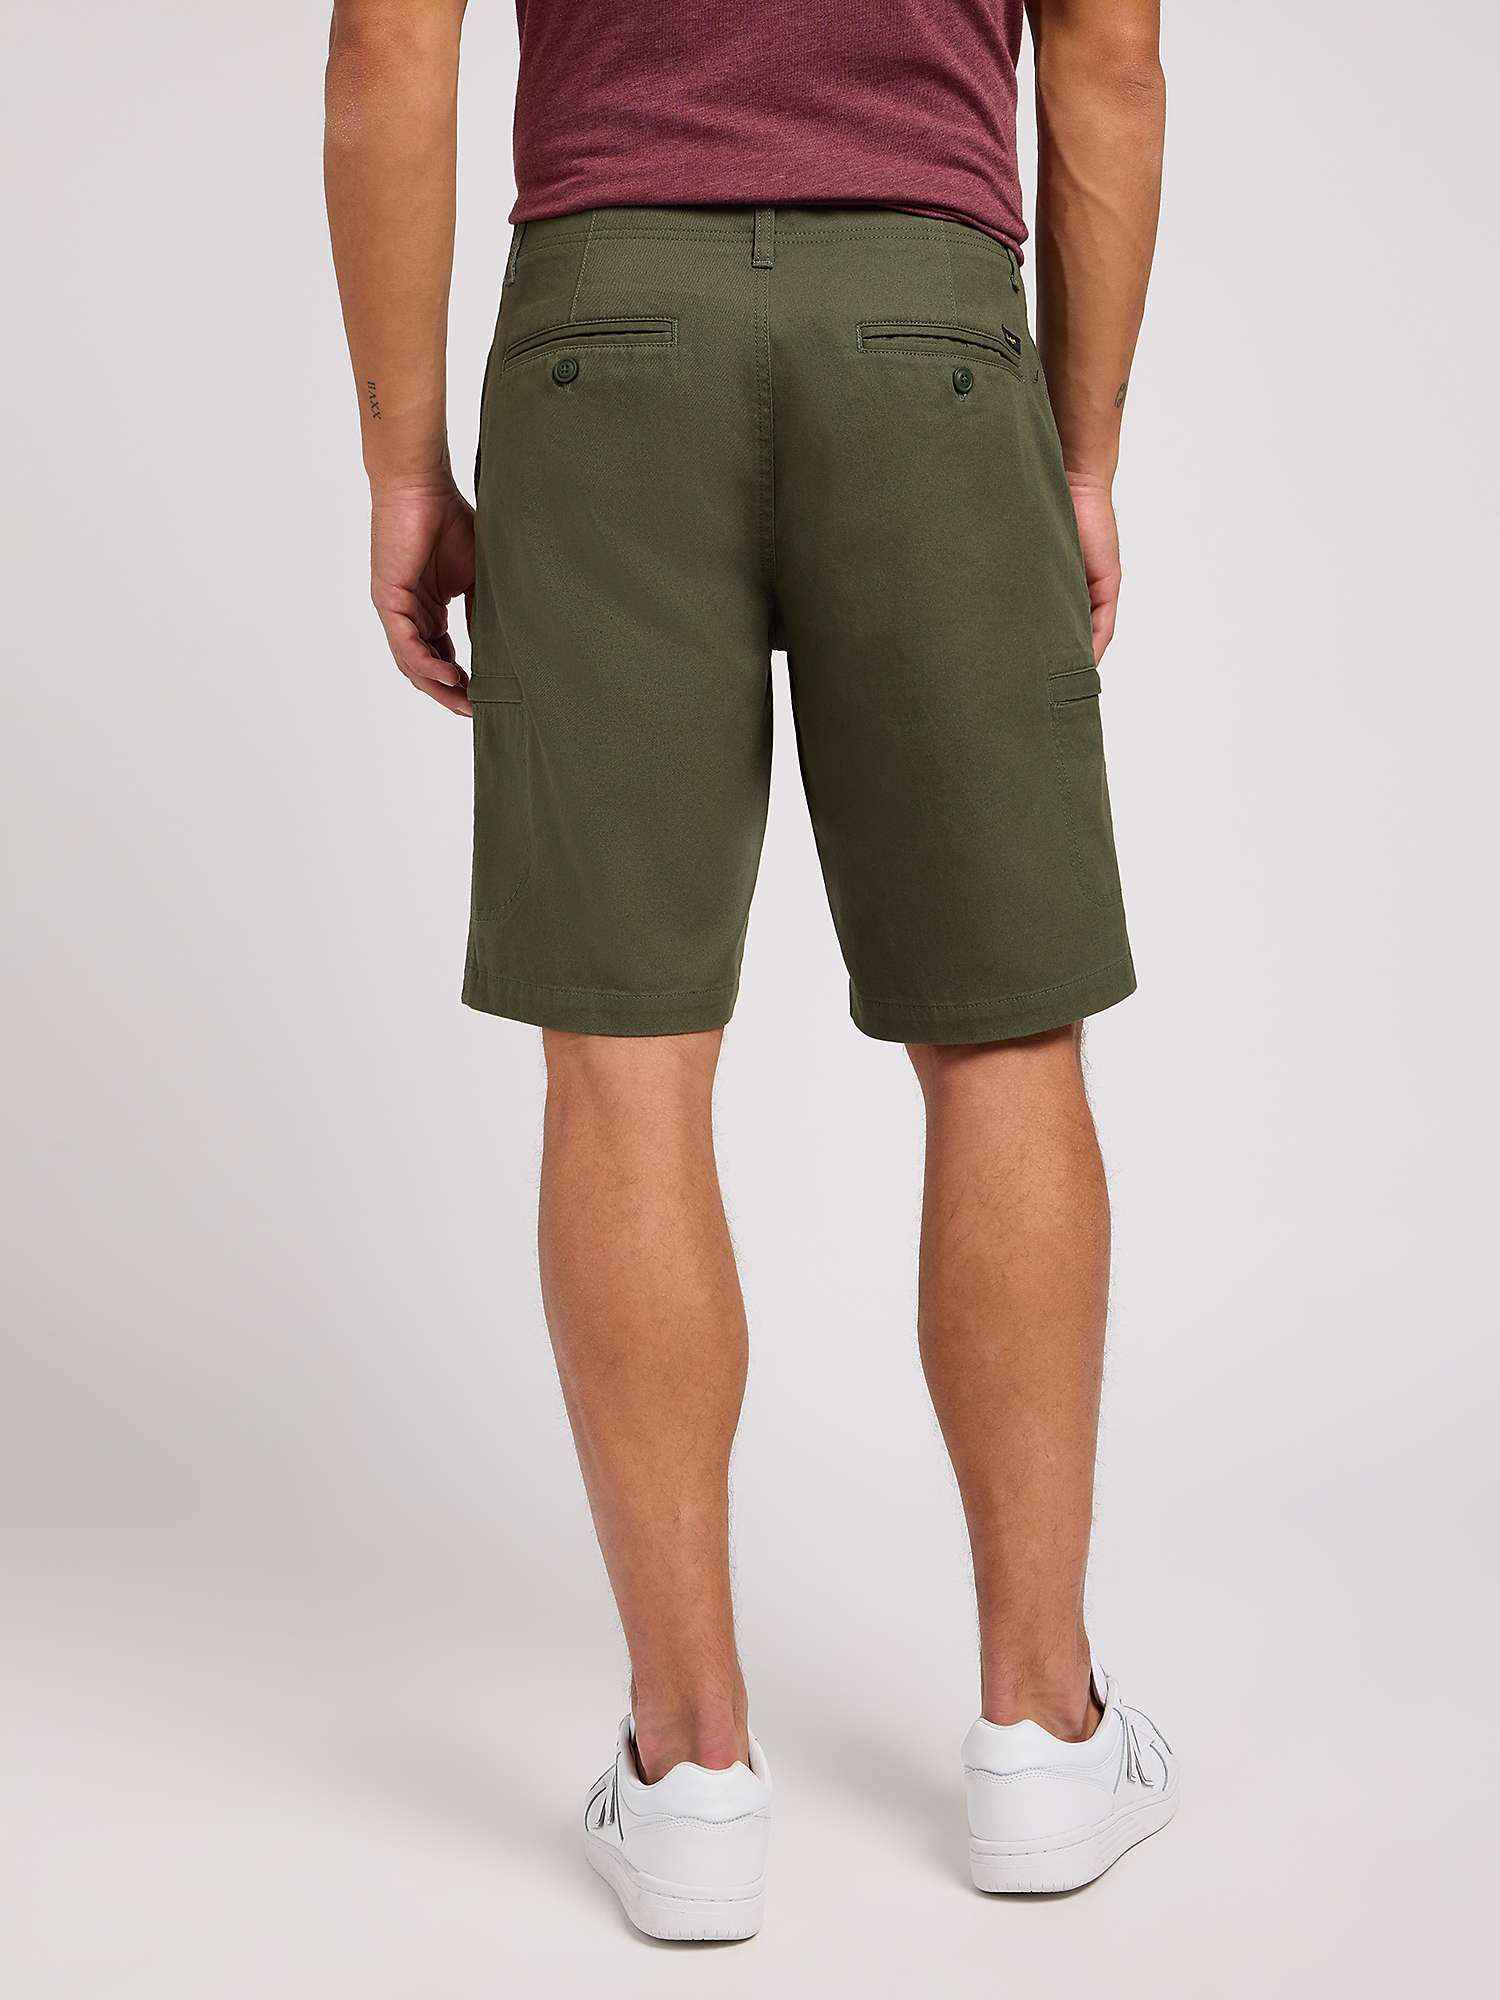 Buy Lee Extreme Movement Workwear Shorts, Olive Grove Online at johnlewis.com